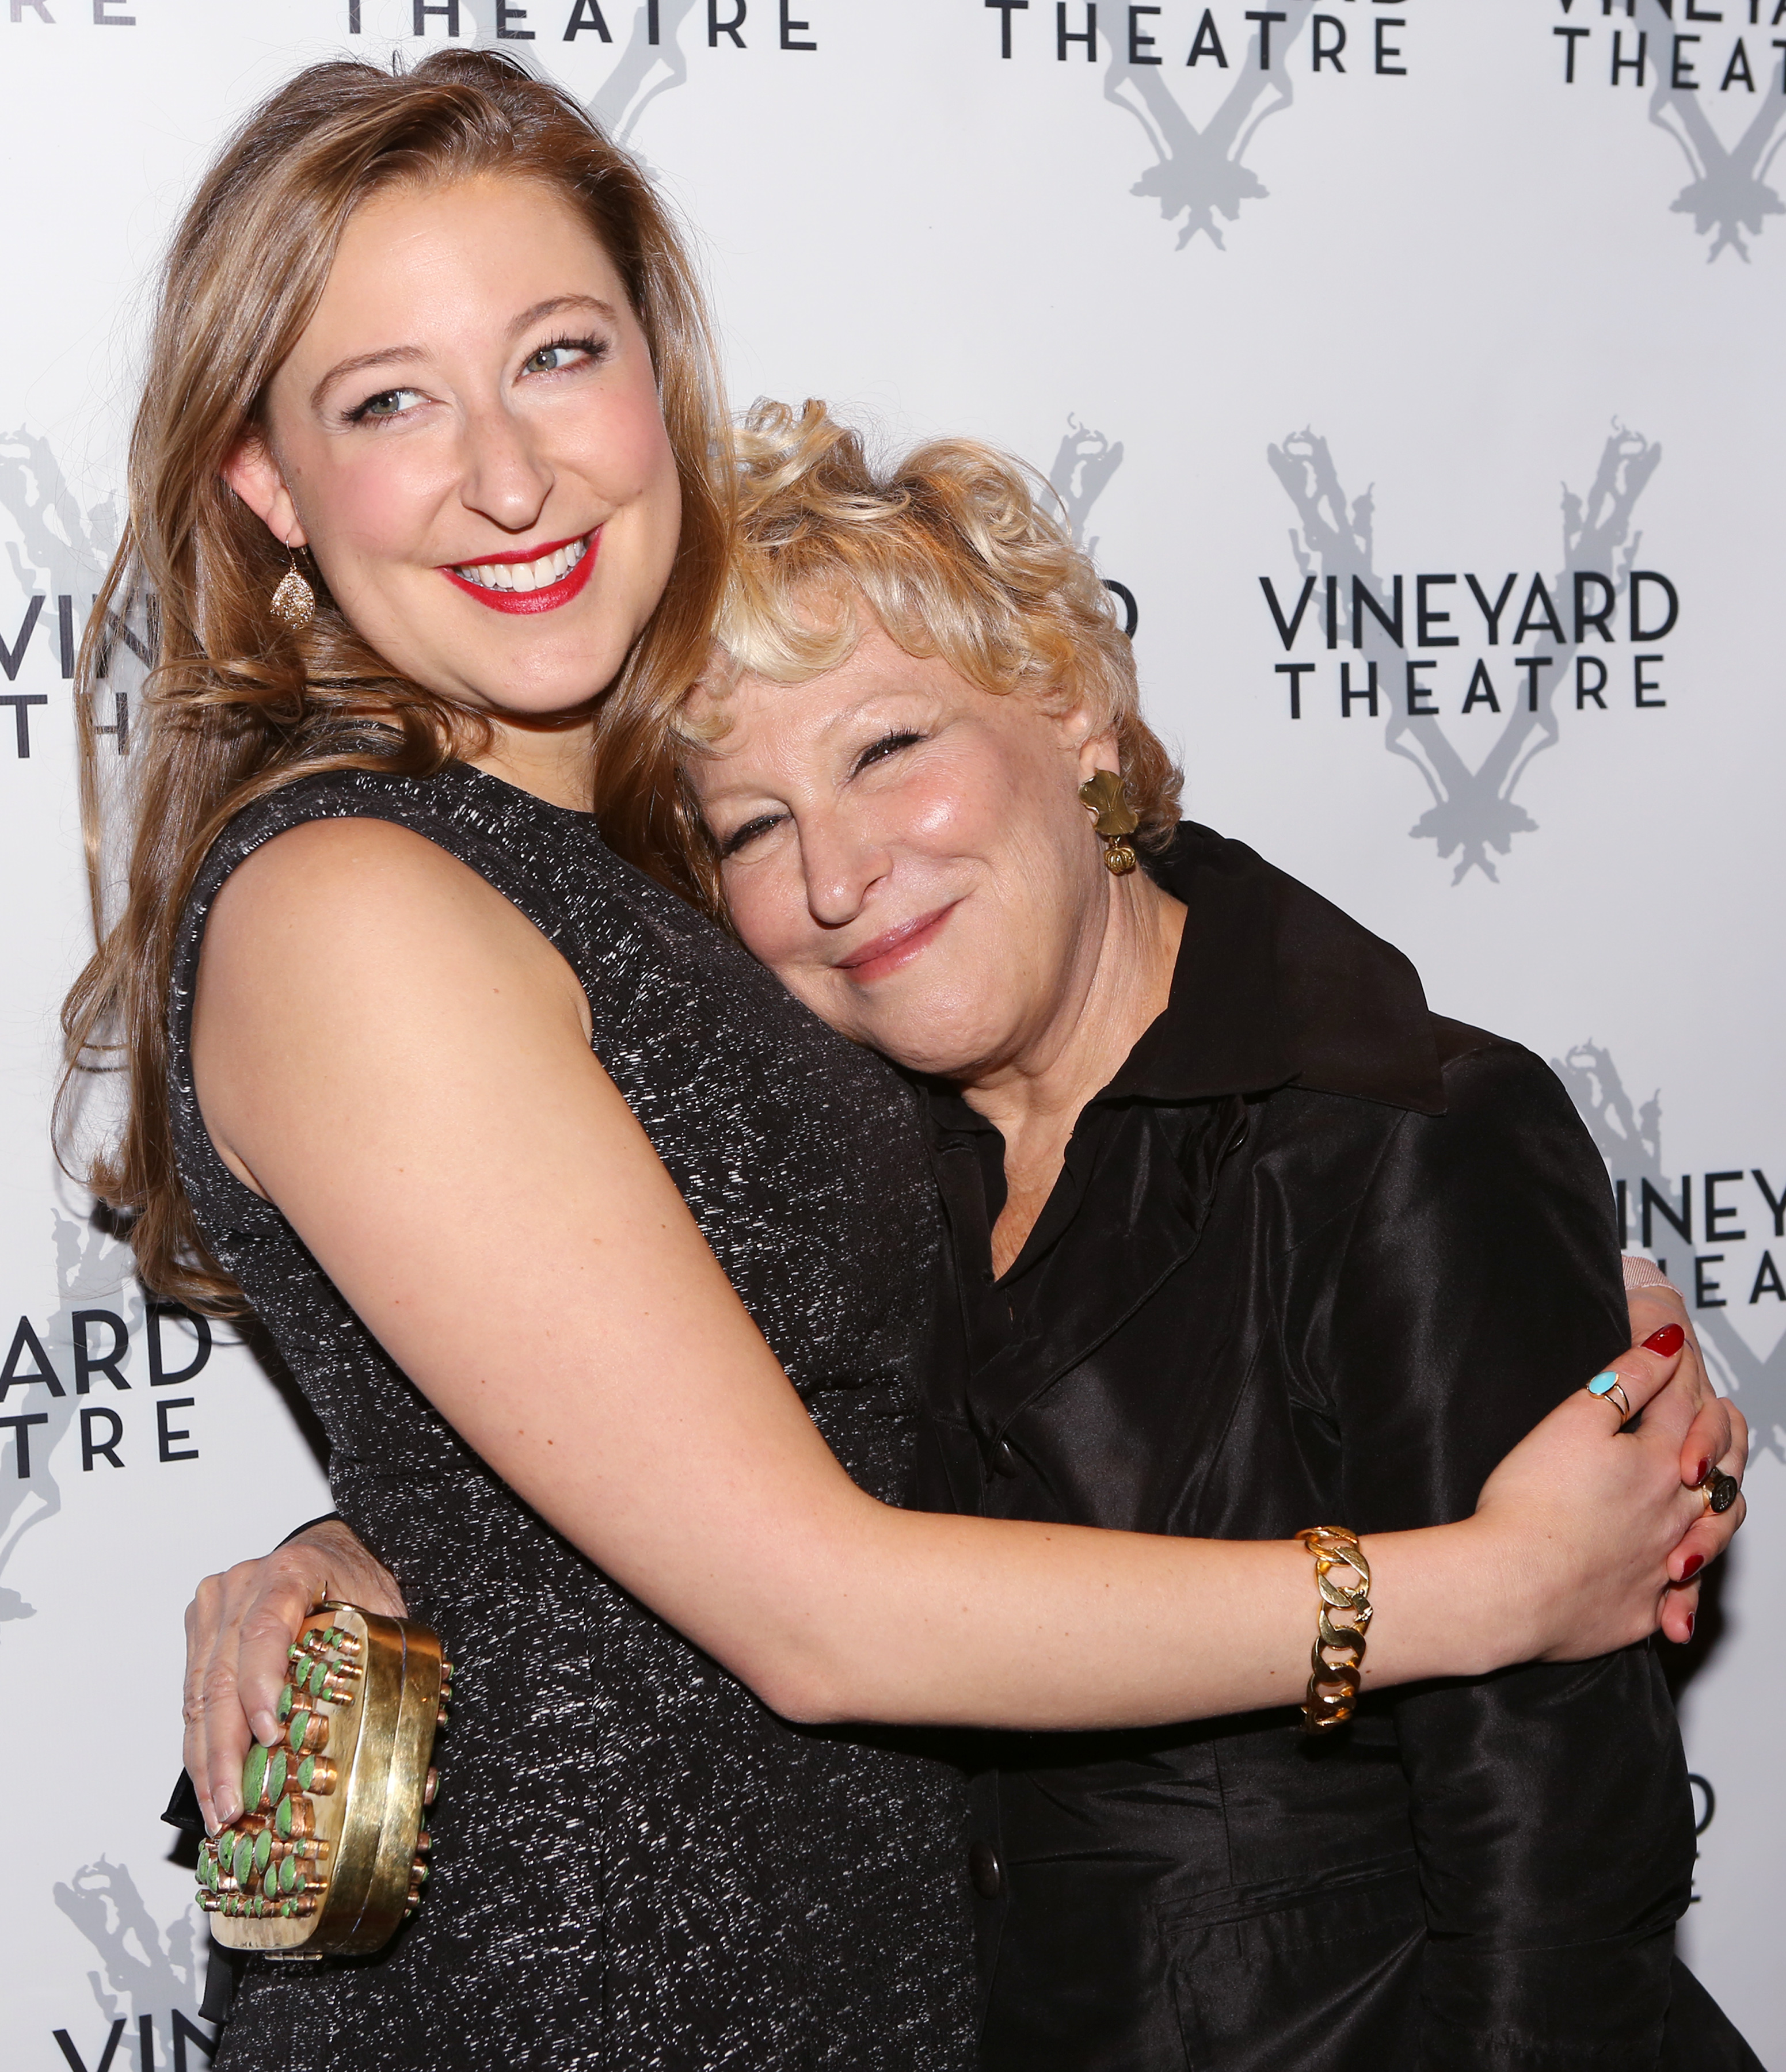 Sophie von Haselberg and mom Bette Midler attend the Off-Broadway opening party for "Billy & Ray" on October 20, 2014 in New York City | Source: Getty Images